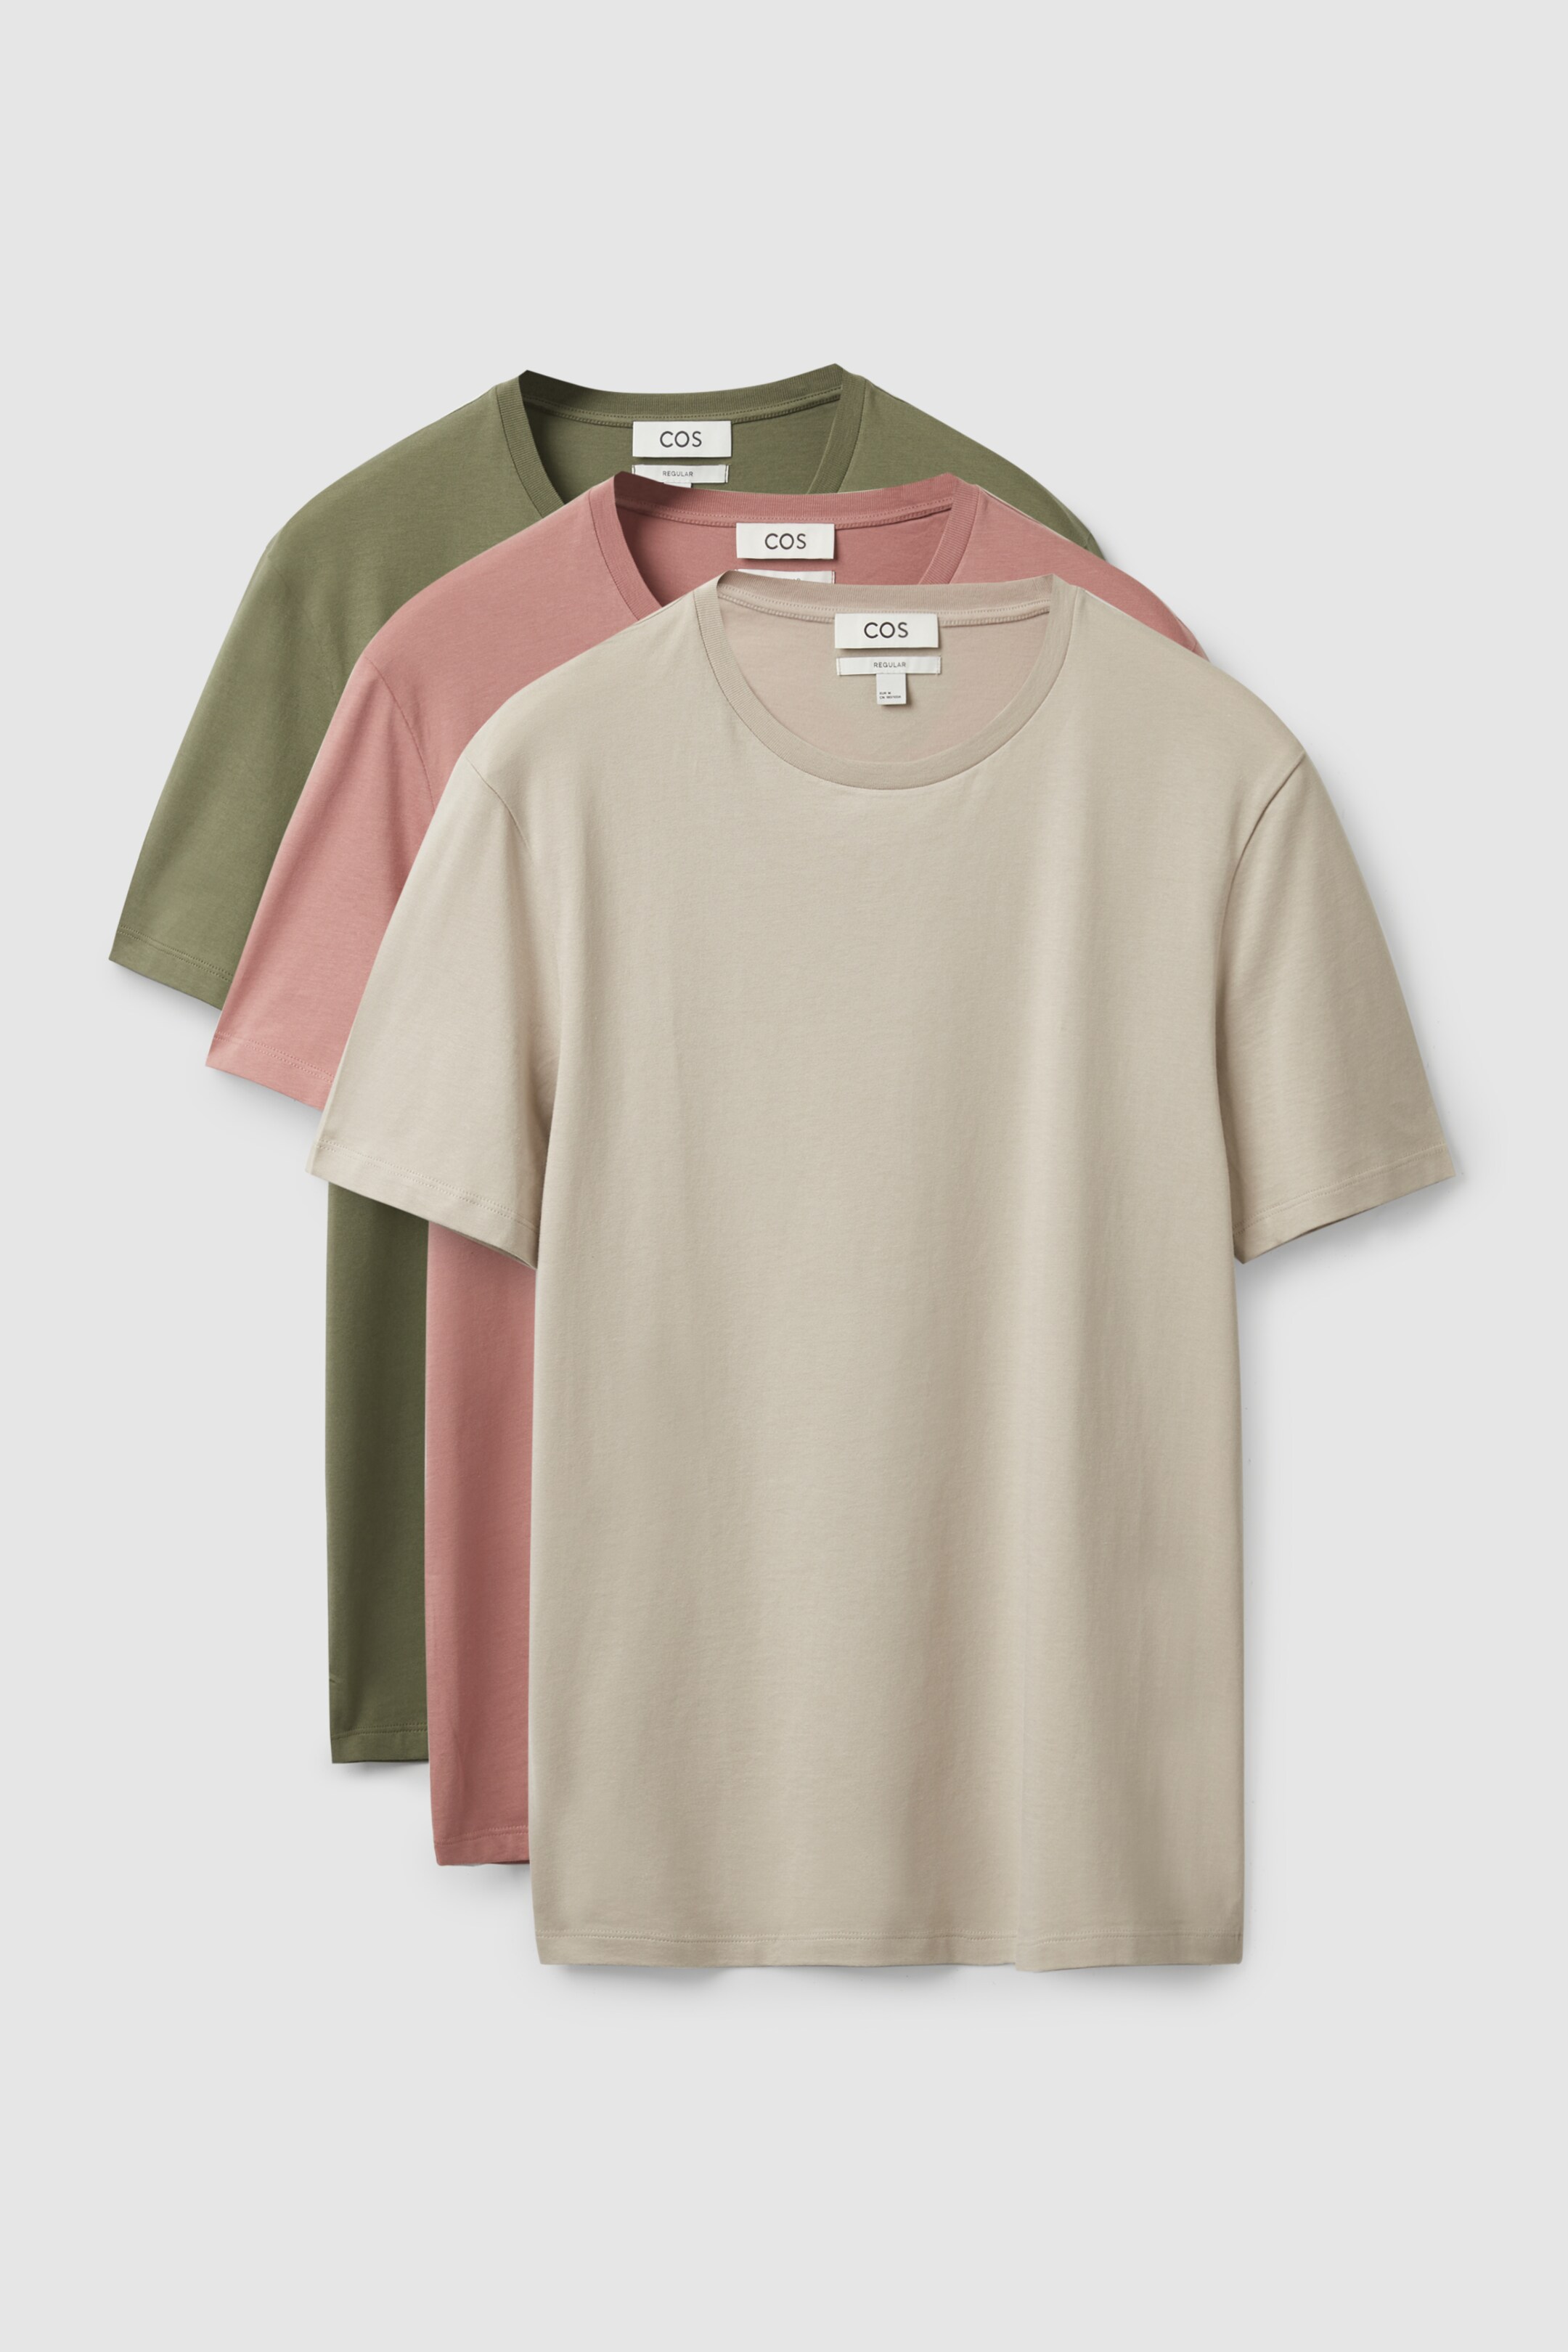 Front image of cos 3-PACK THE EXTRA FINE T-SHIRTS in KHAKI / ECRU / PINK